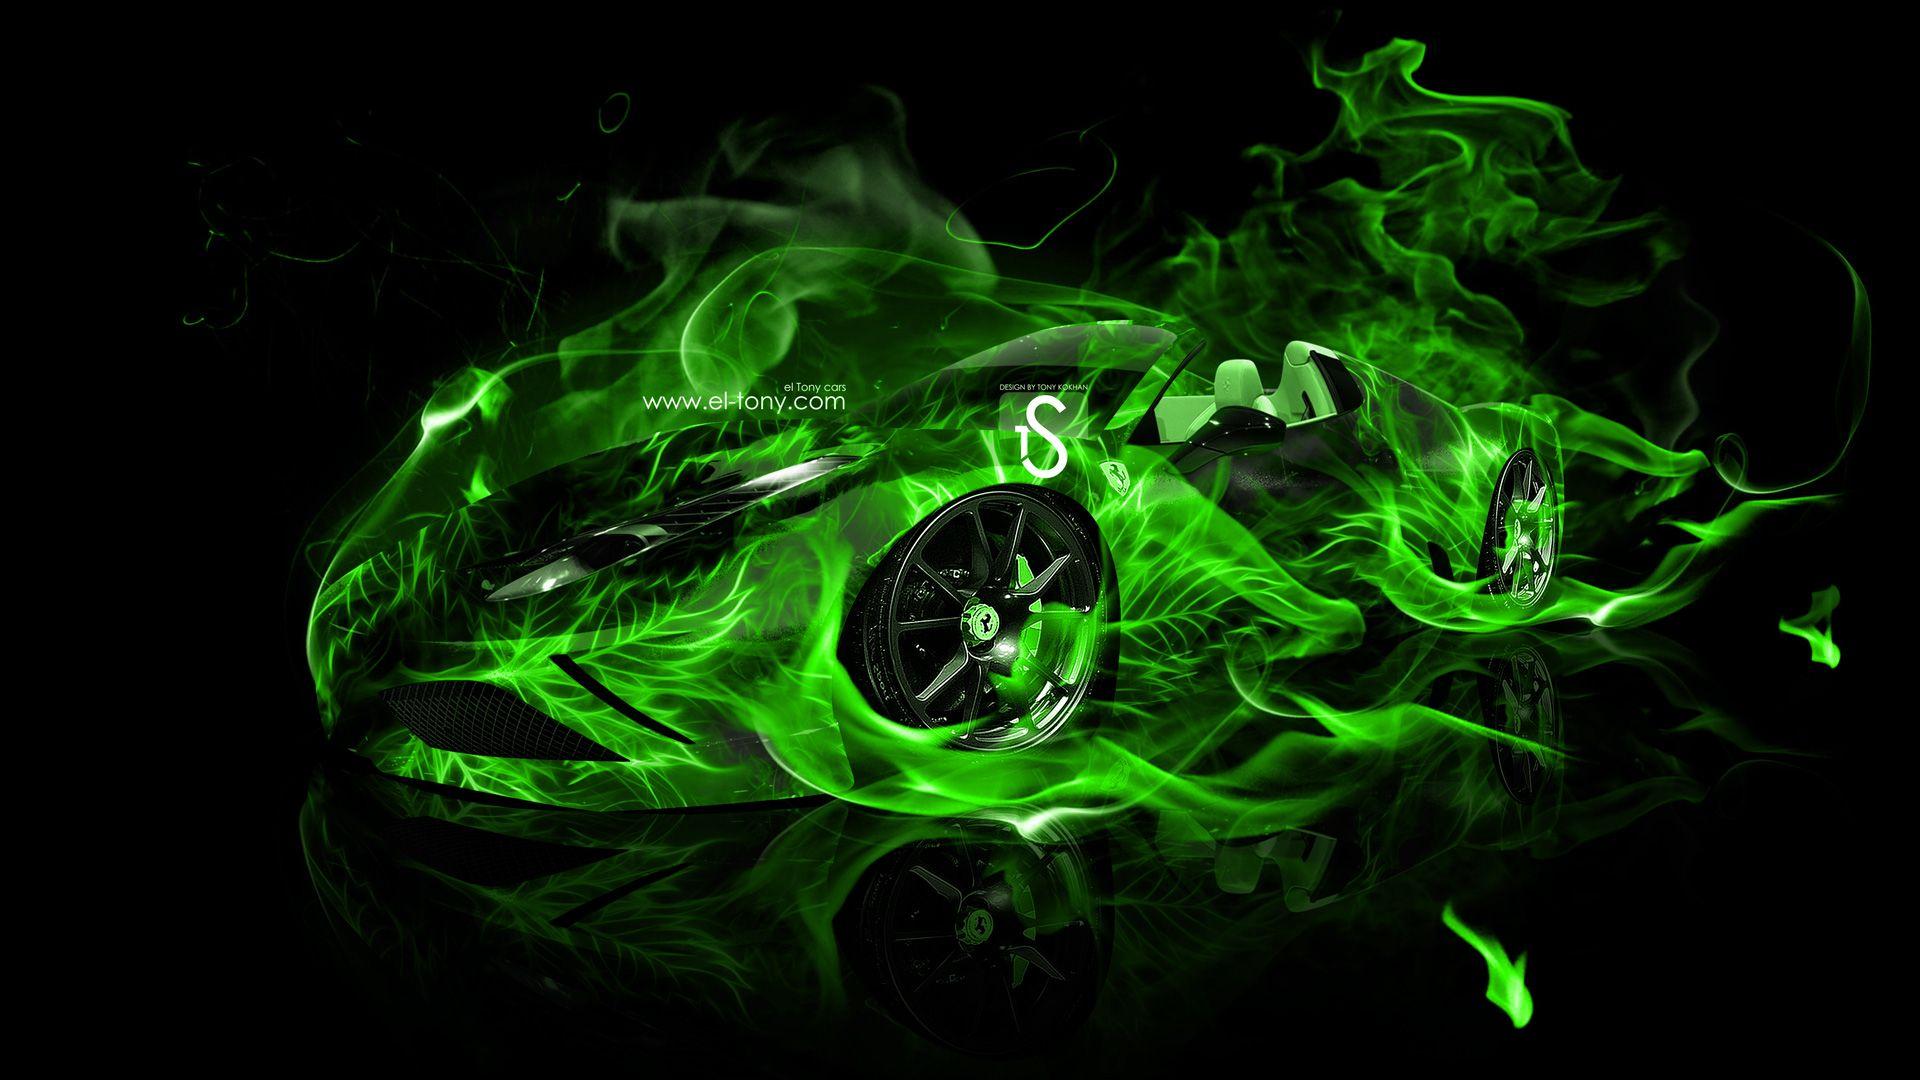 image of Green Fire Wallpaper - #SpaceHero